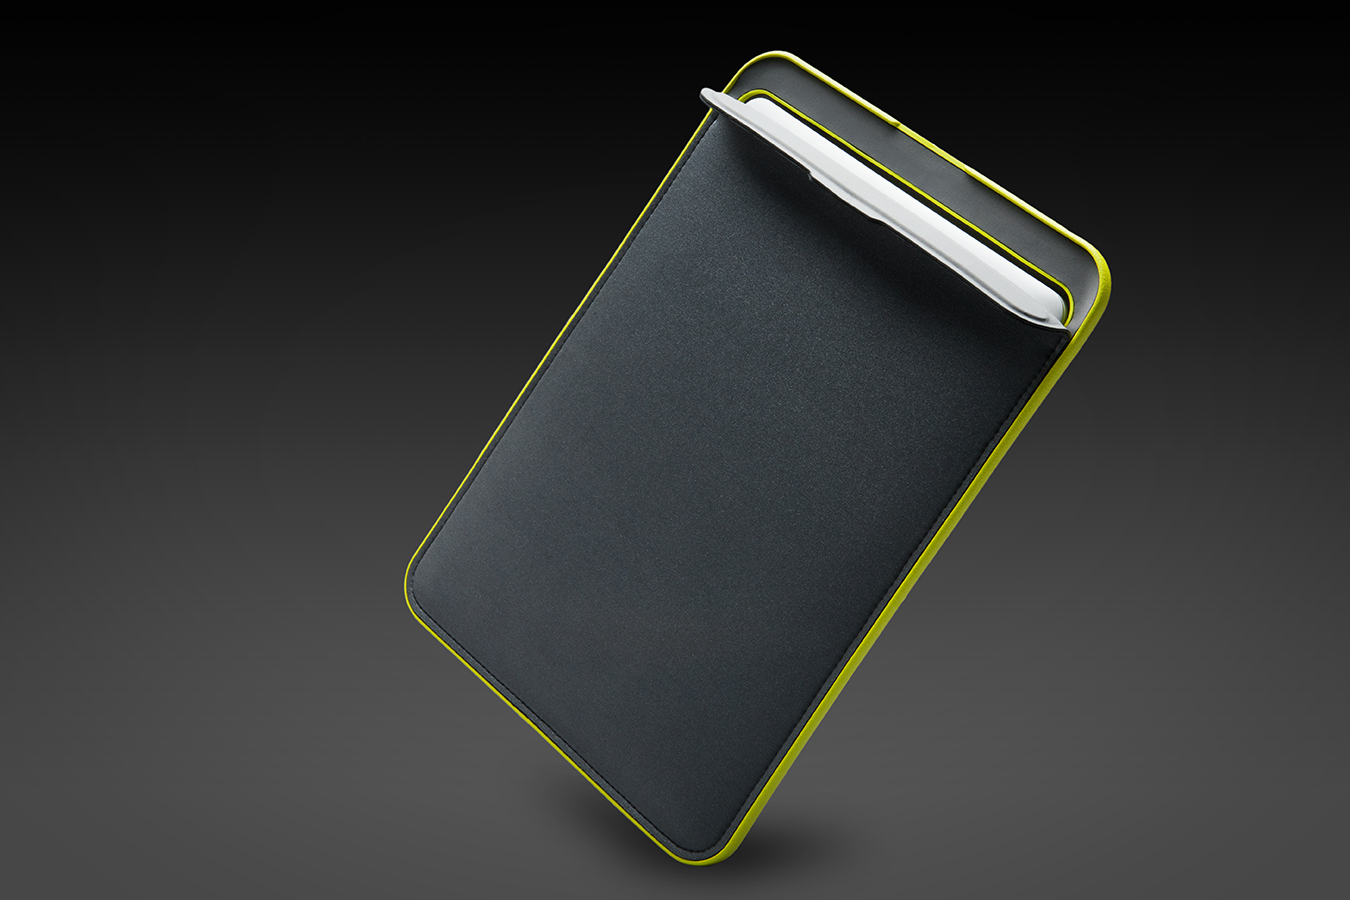 incase-launches-icon-sleeve-with-new-protection-technology-01